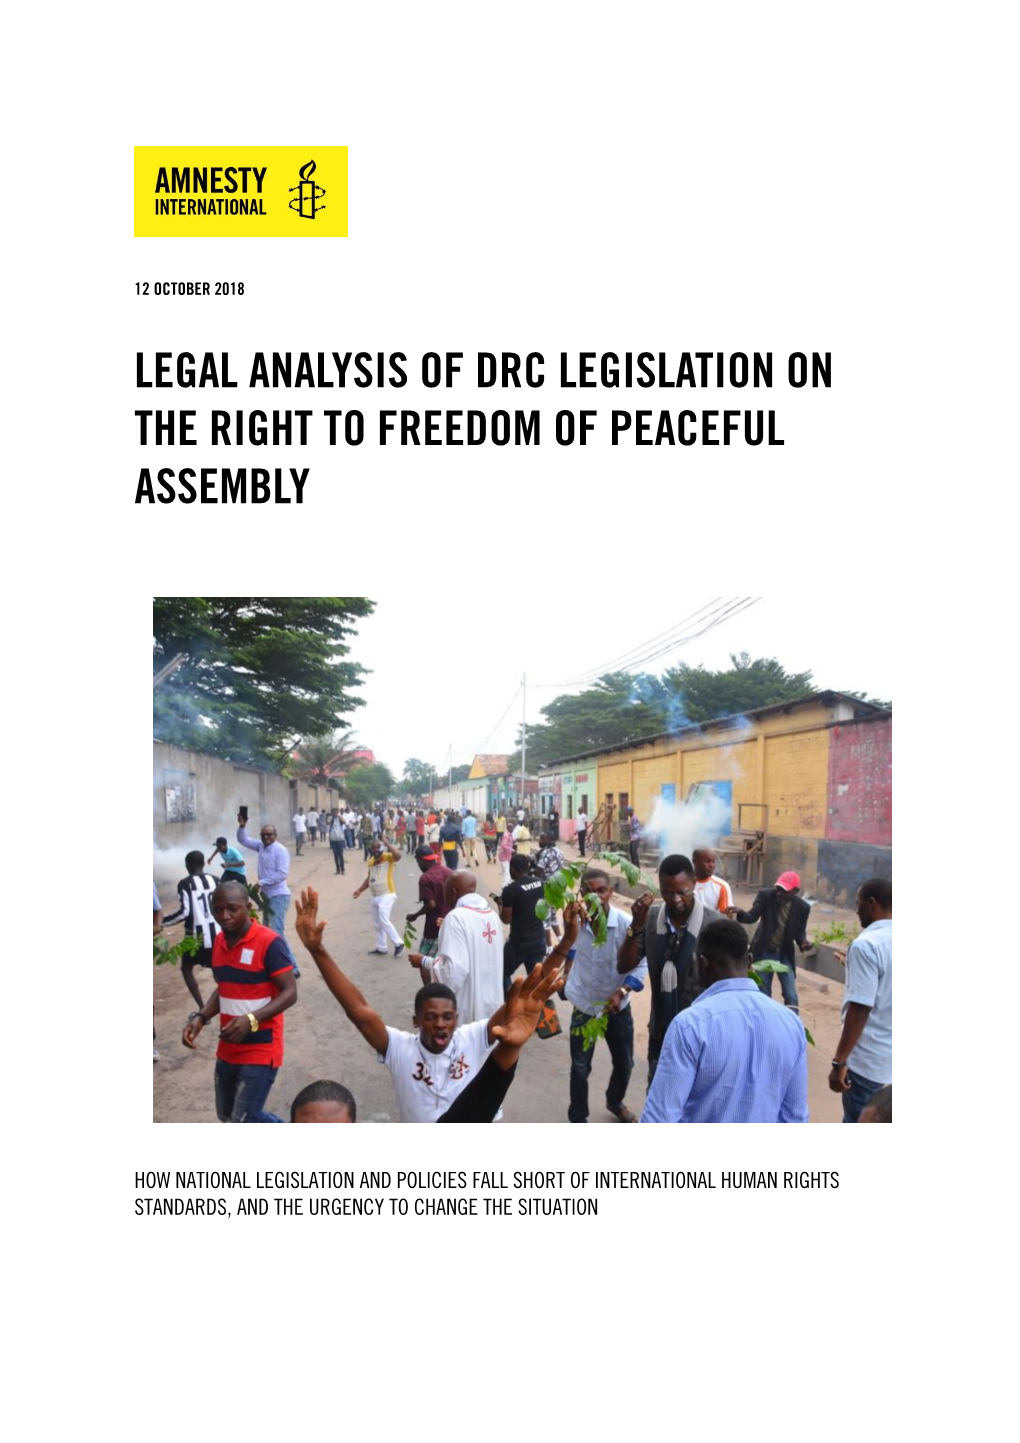 Drc Legislation on the Right to Freedom of Peaceful Assembly